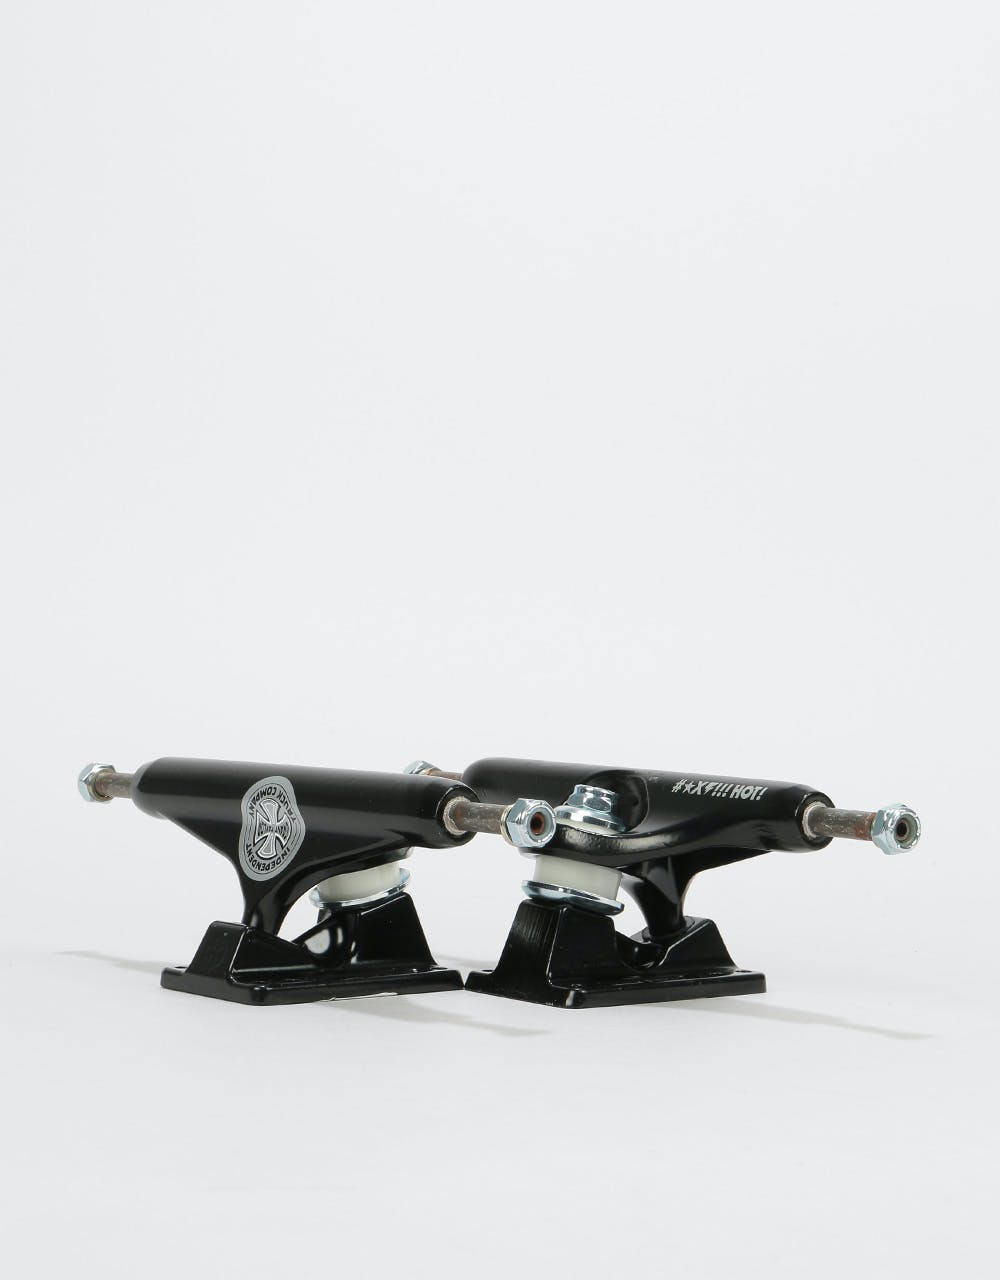 Independent Grant Taylor Stage 11 Hollow 159 Standard Pro Trucks (Pair)